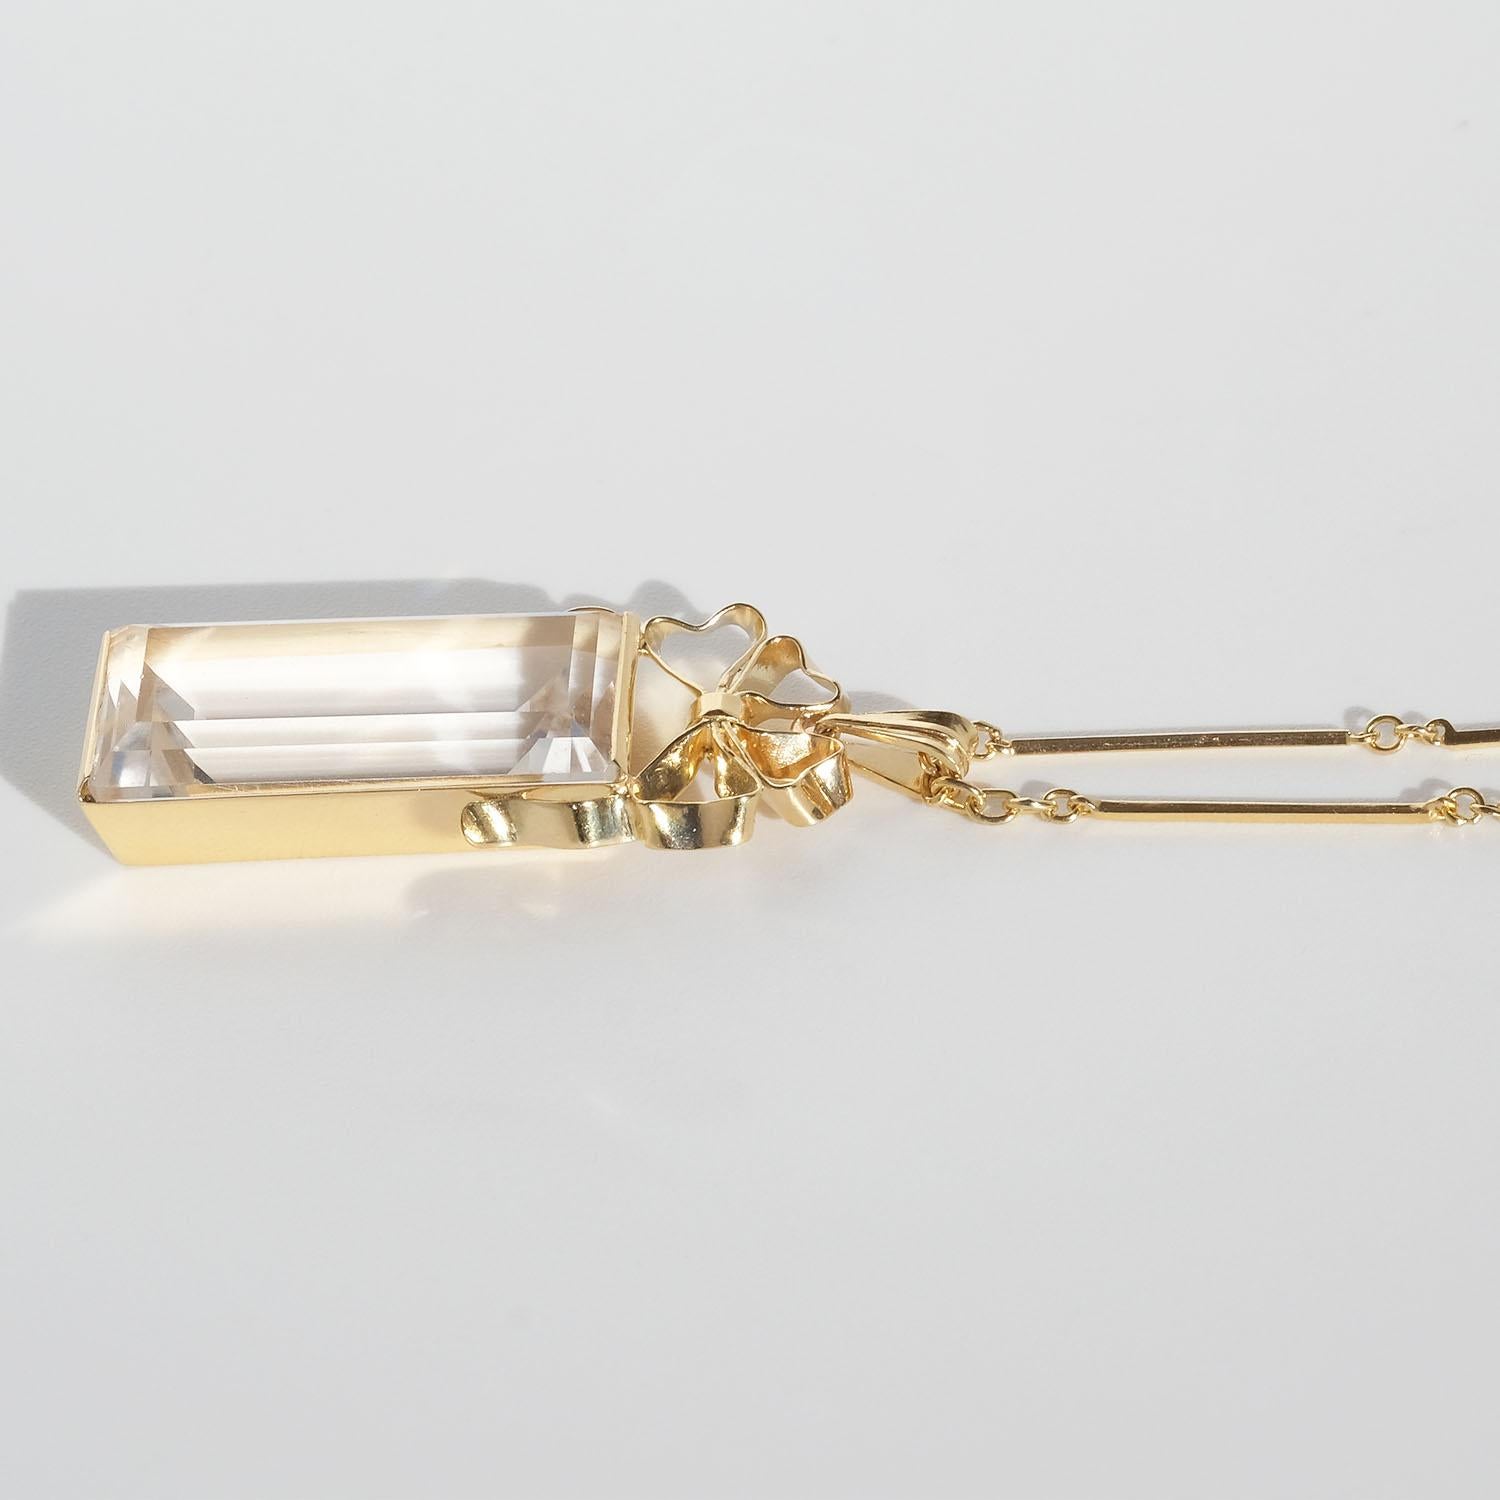 Vintage 18k Gold and Rock Crystal Necklace by Ateljé Stigbert Made in the 1940s In Good Condition For Sale In Stockholm, SE